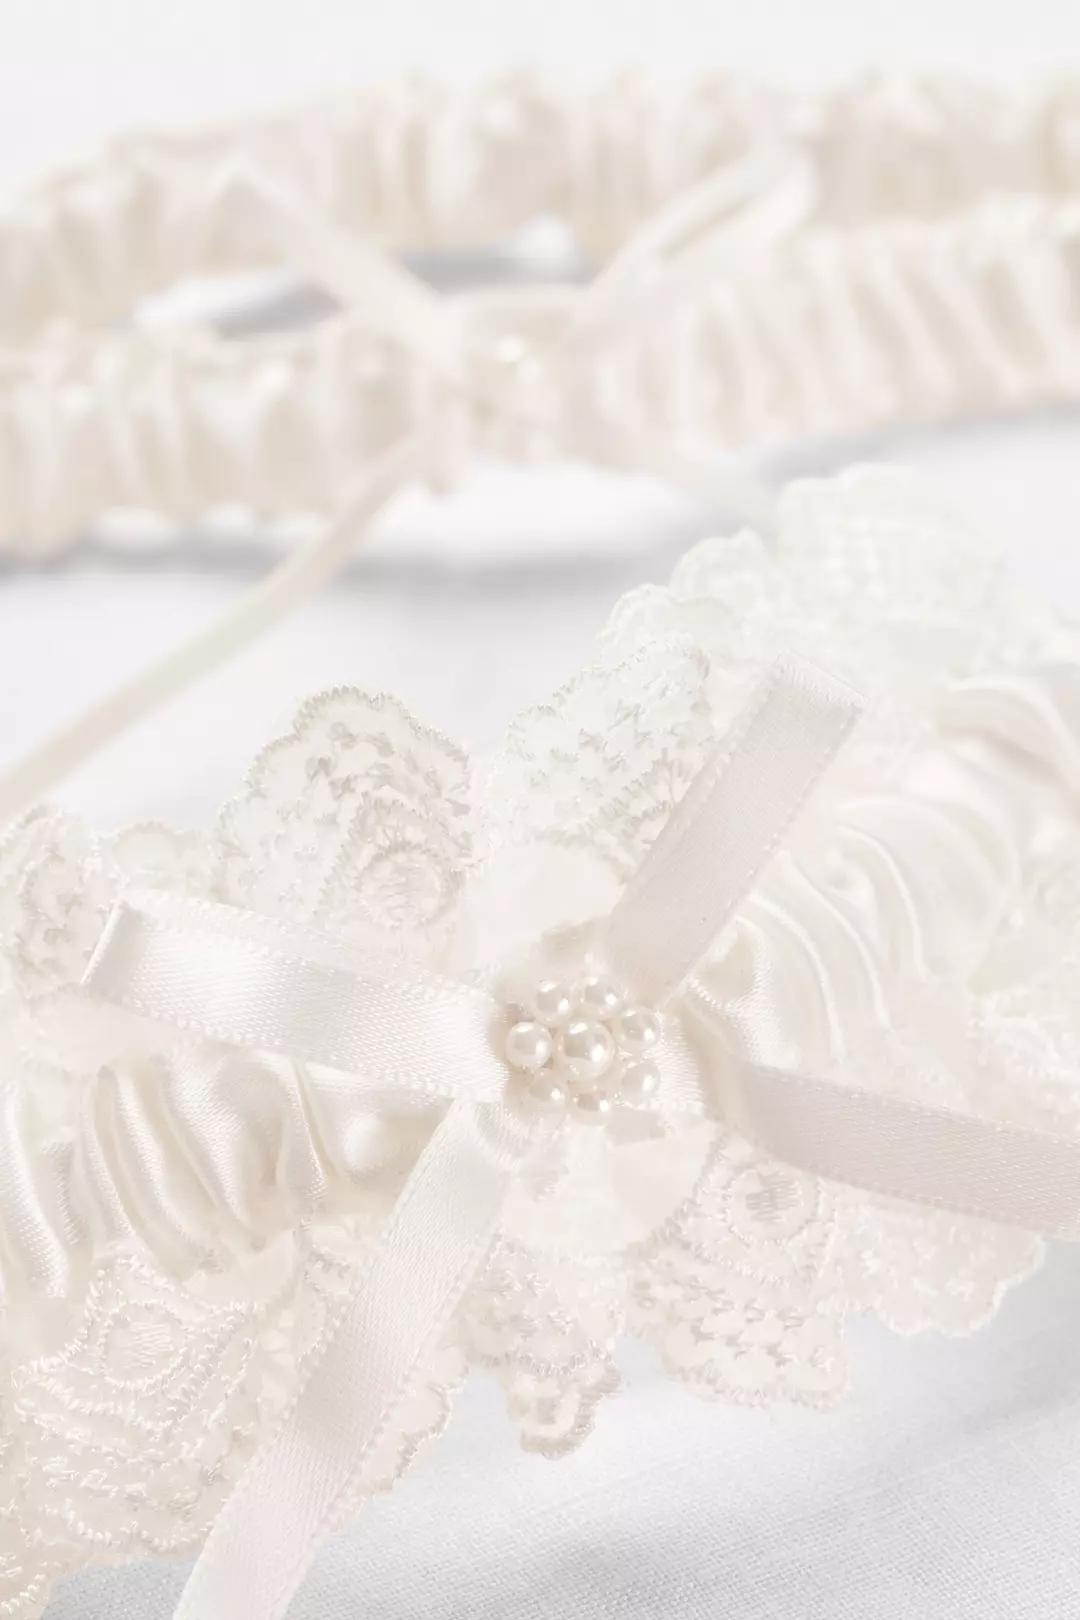 Ruffled Lace and Pearl Garter Set with Ribbon Bows Image 2